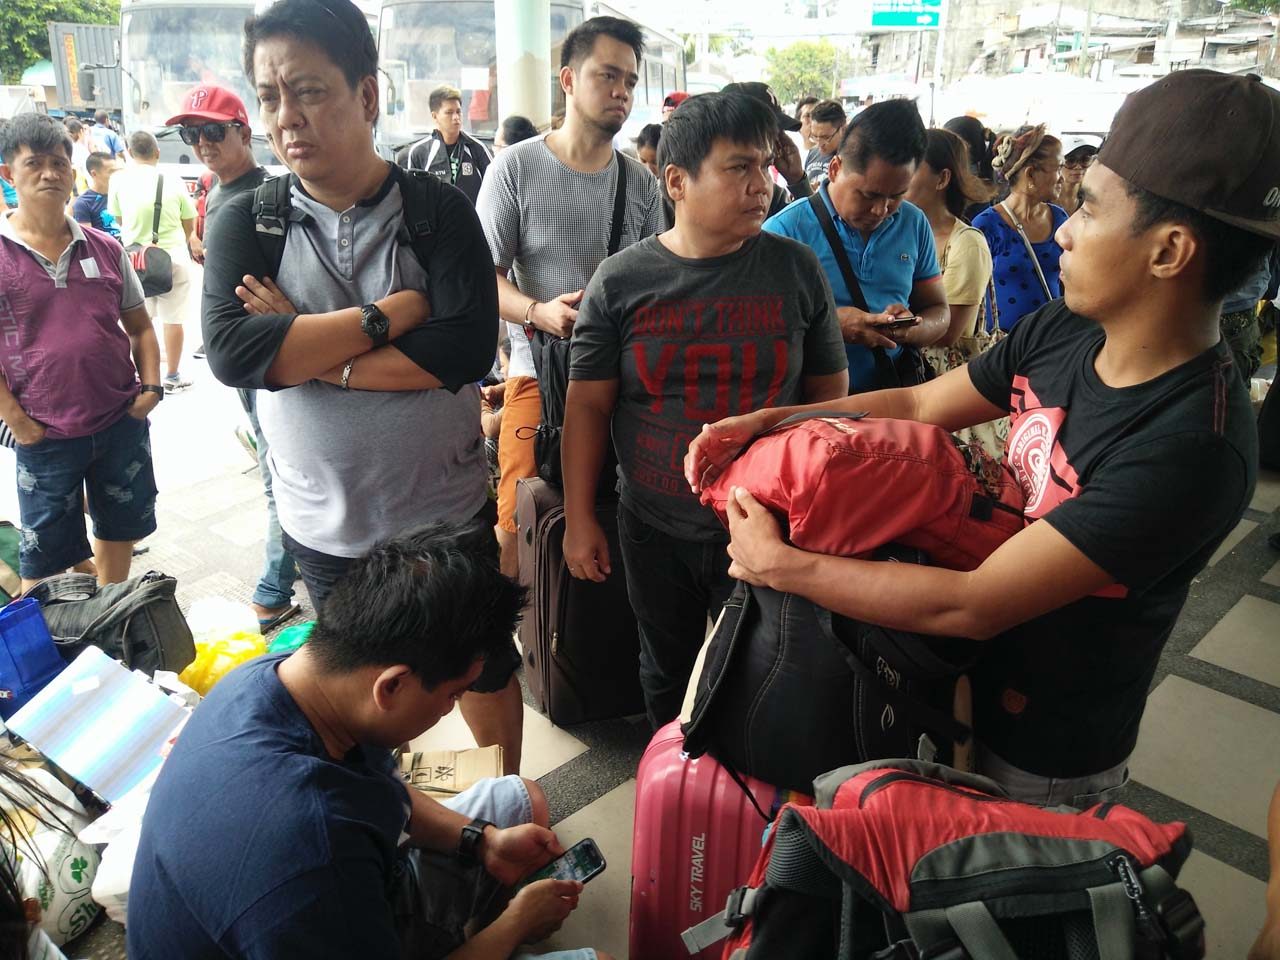 IN PHOTOS: Hundreds of passengers stranded by Tropical Depression Maring